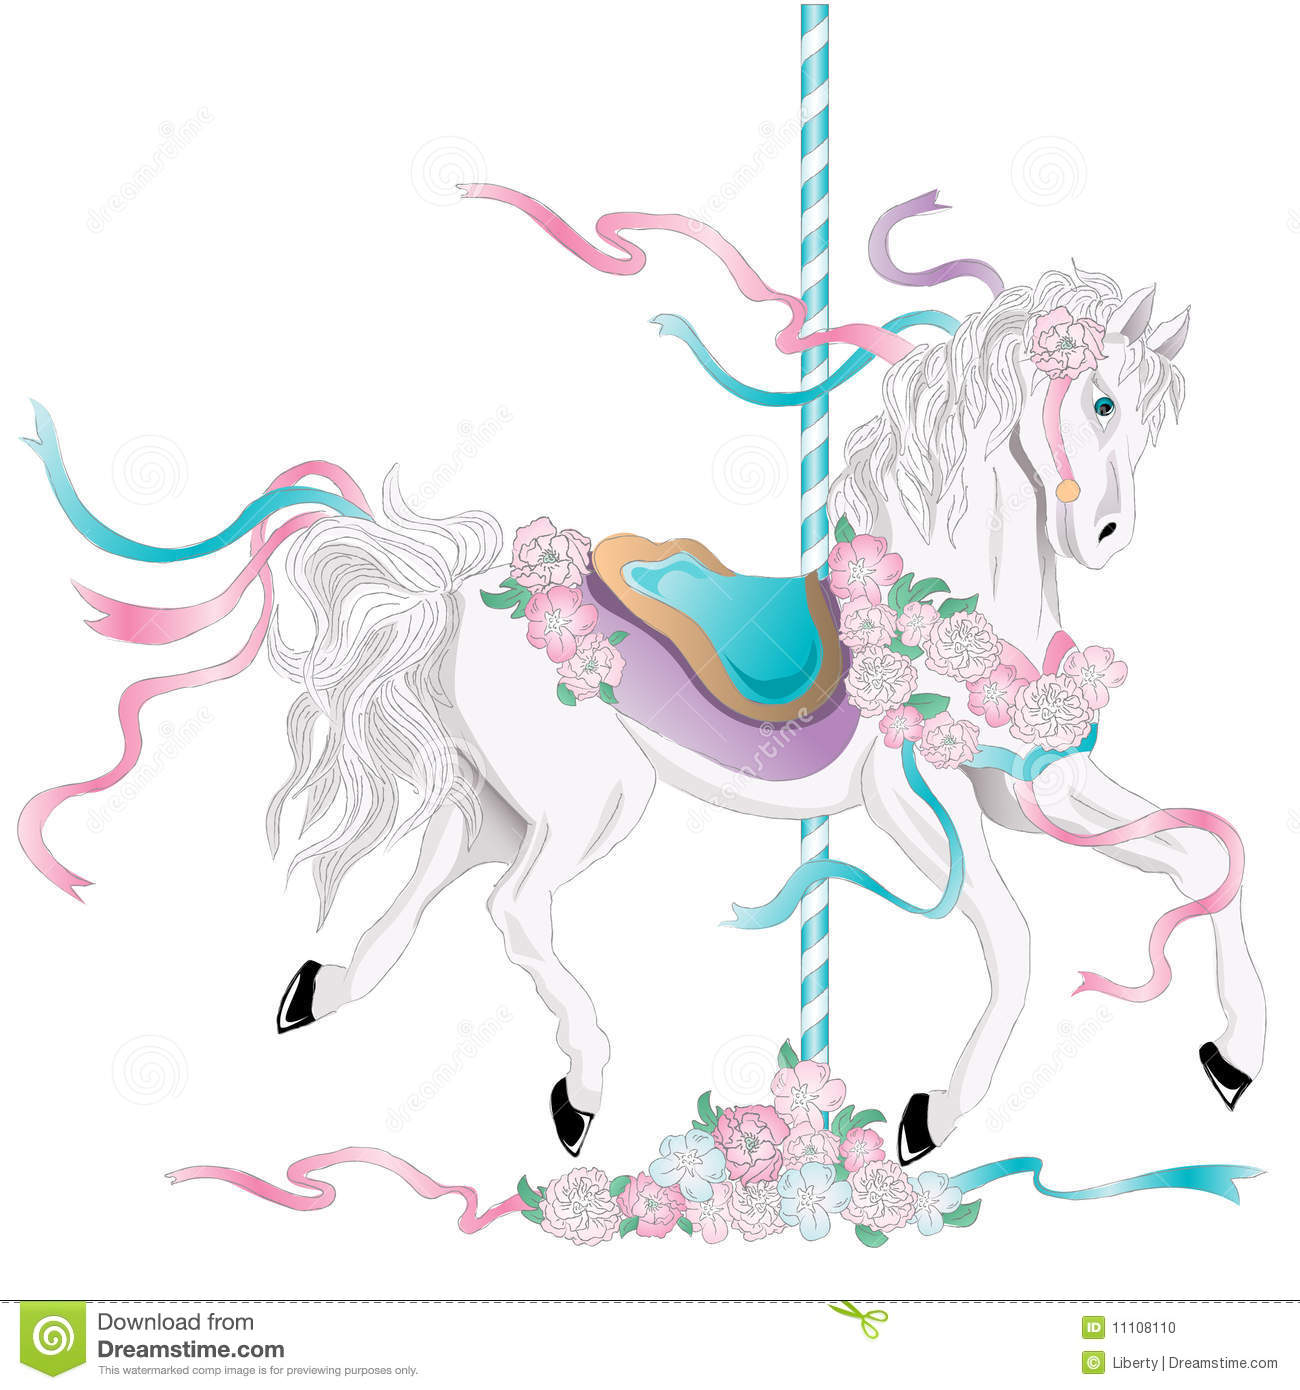 912 Carousel free clipart.